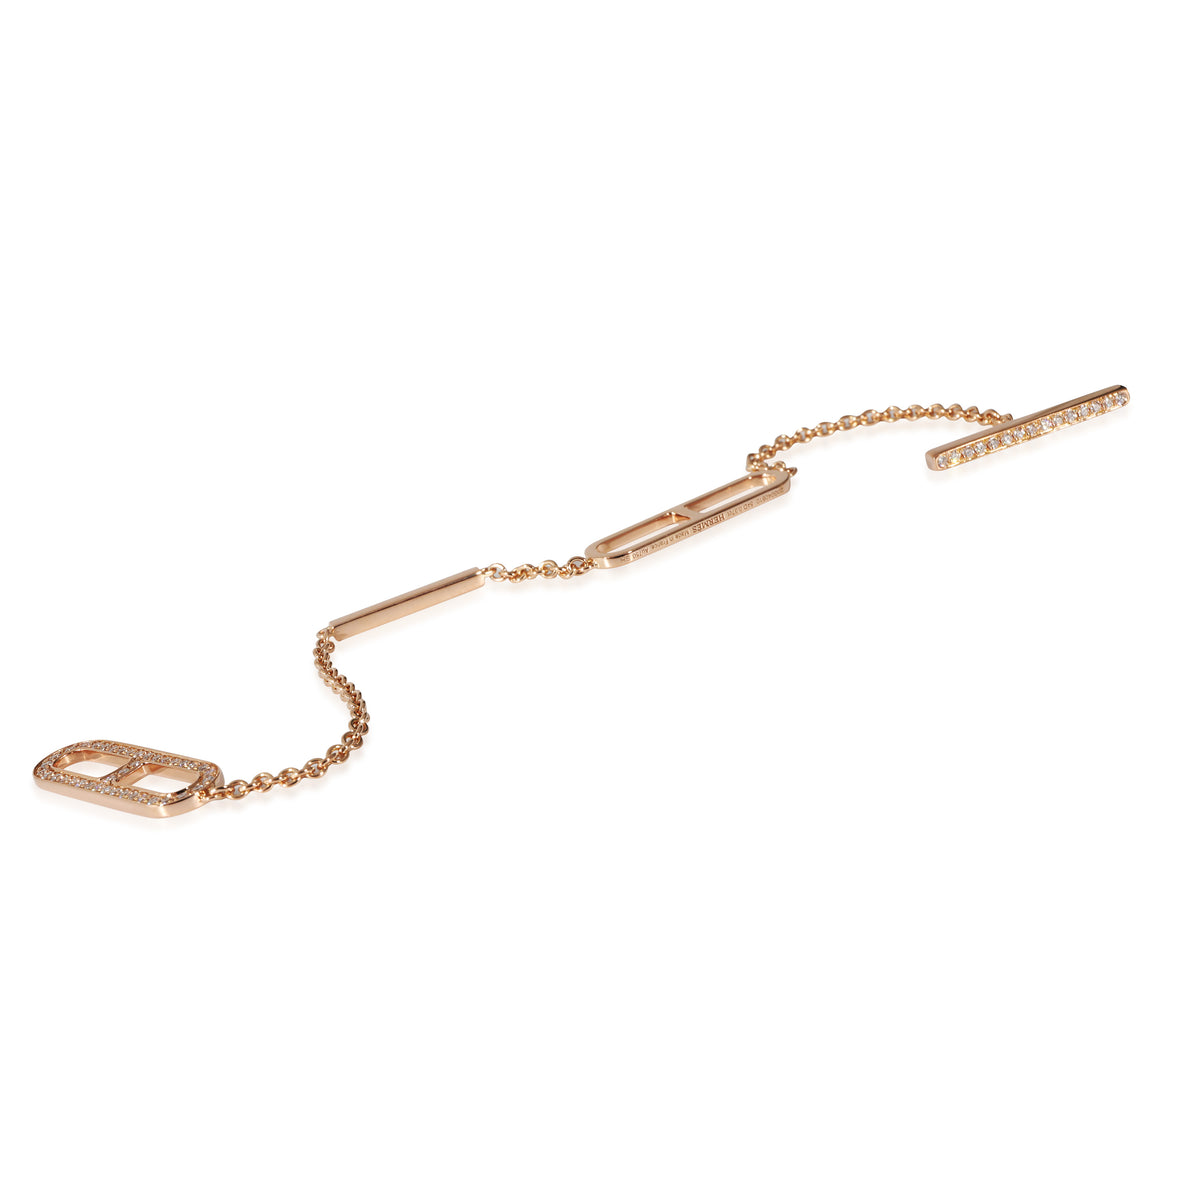 Ever Chaine D'Ancre Bracelet, Small Model in 18KT Rose Gold 0.37ctw